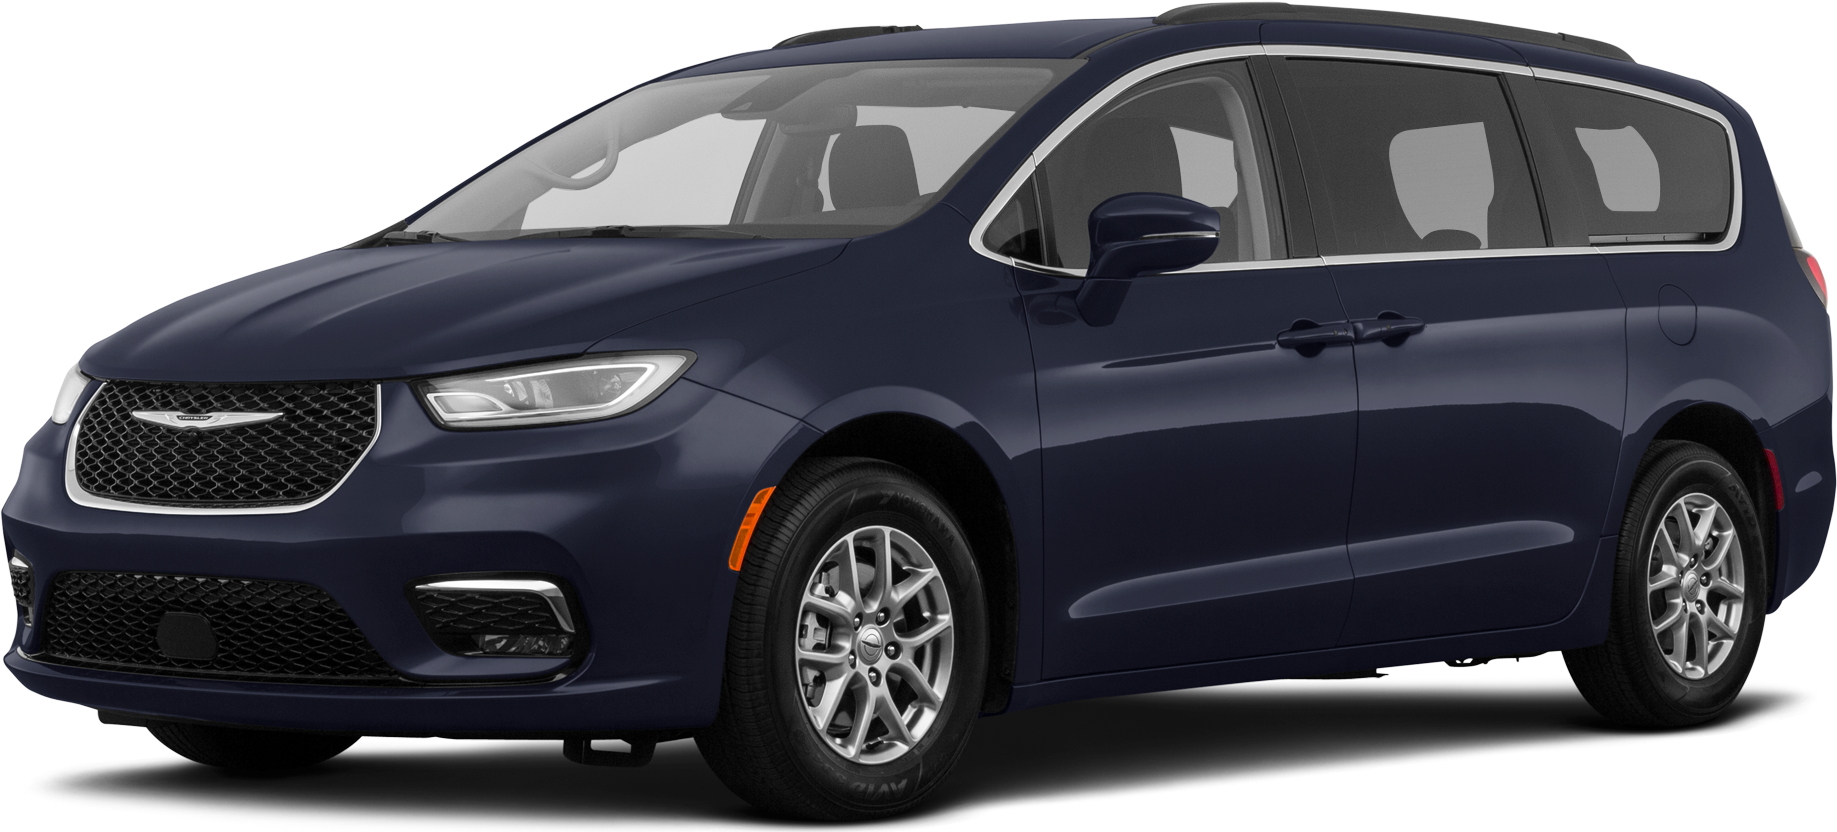 2021 Chrysler Pacifica: Choosing the Right Trim - Autotrader